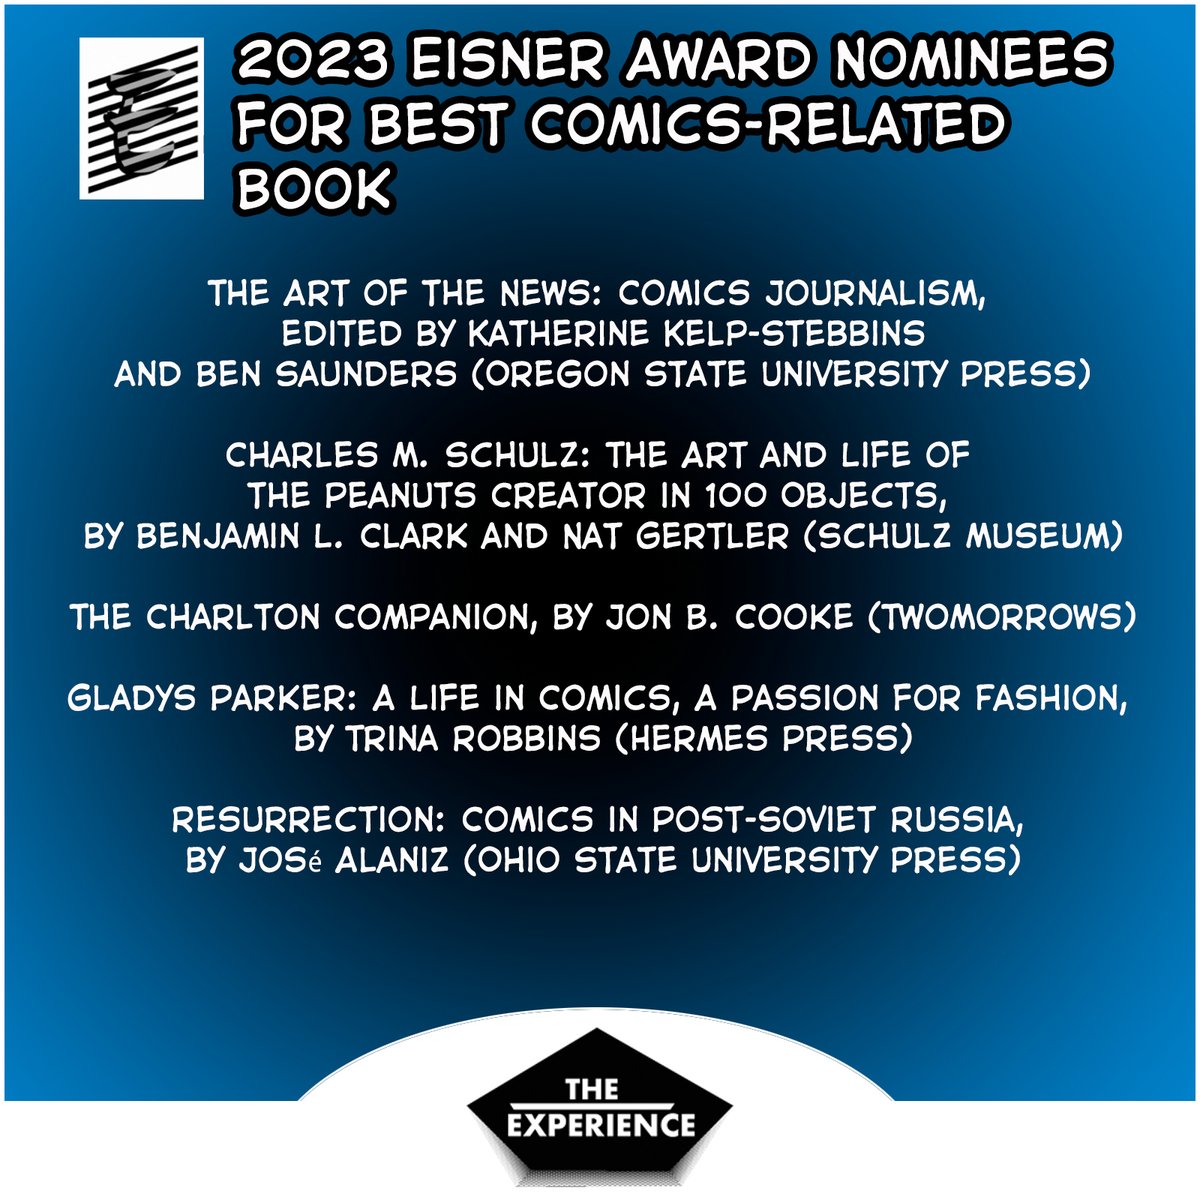 Congratulations to the  Eisner Awards Nominees 2023 for Best Comics-Related Book